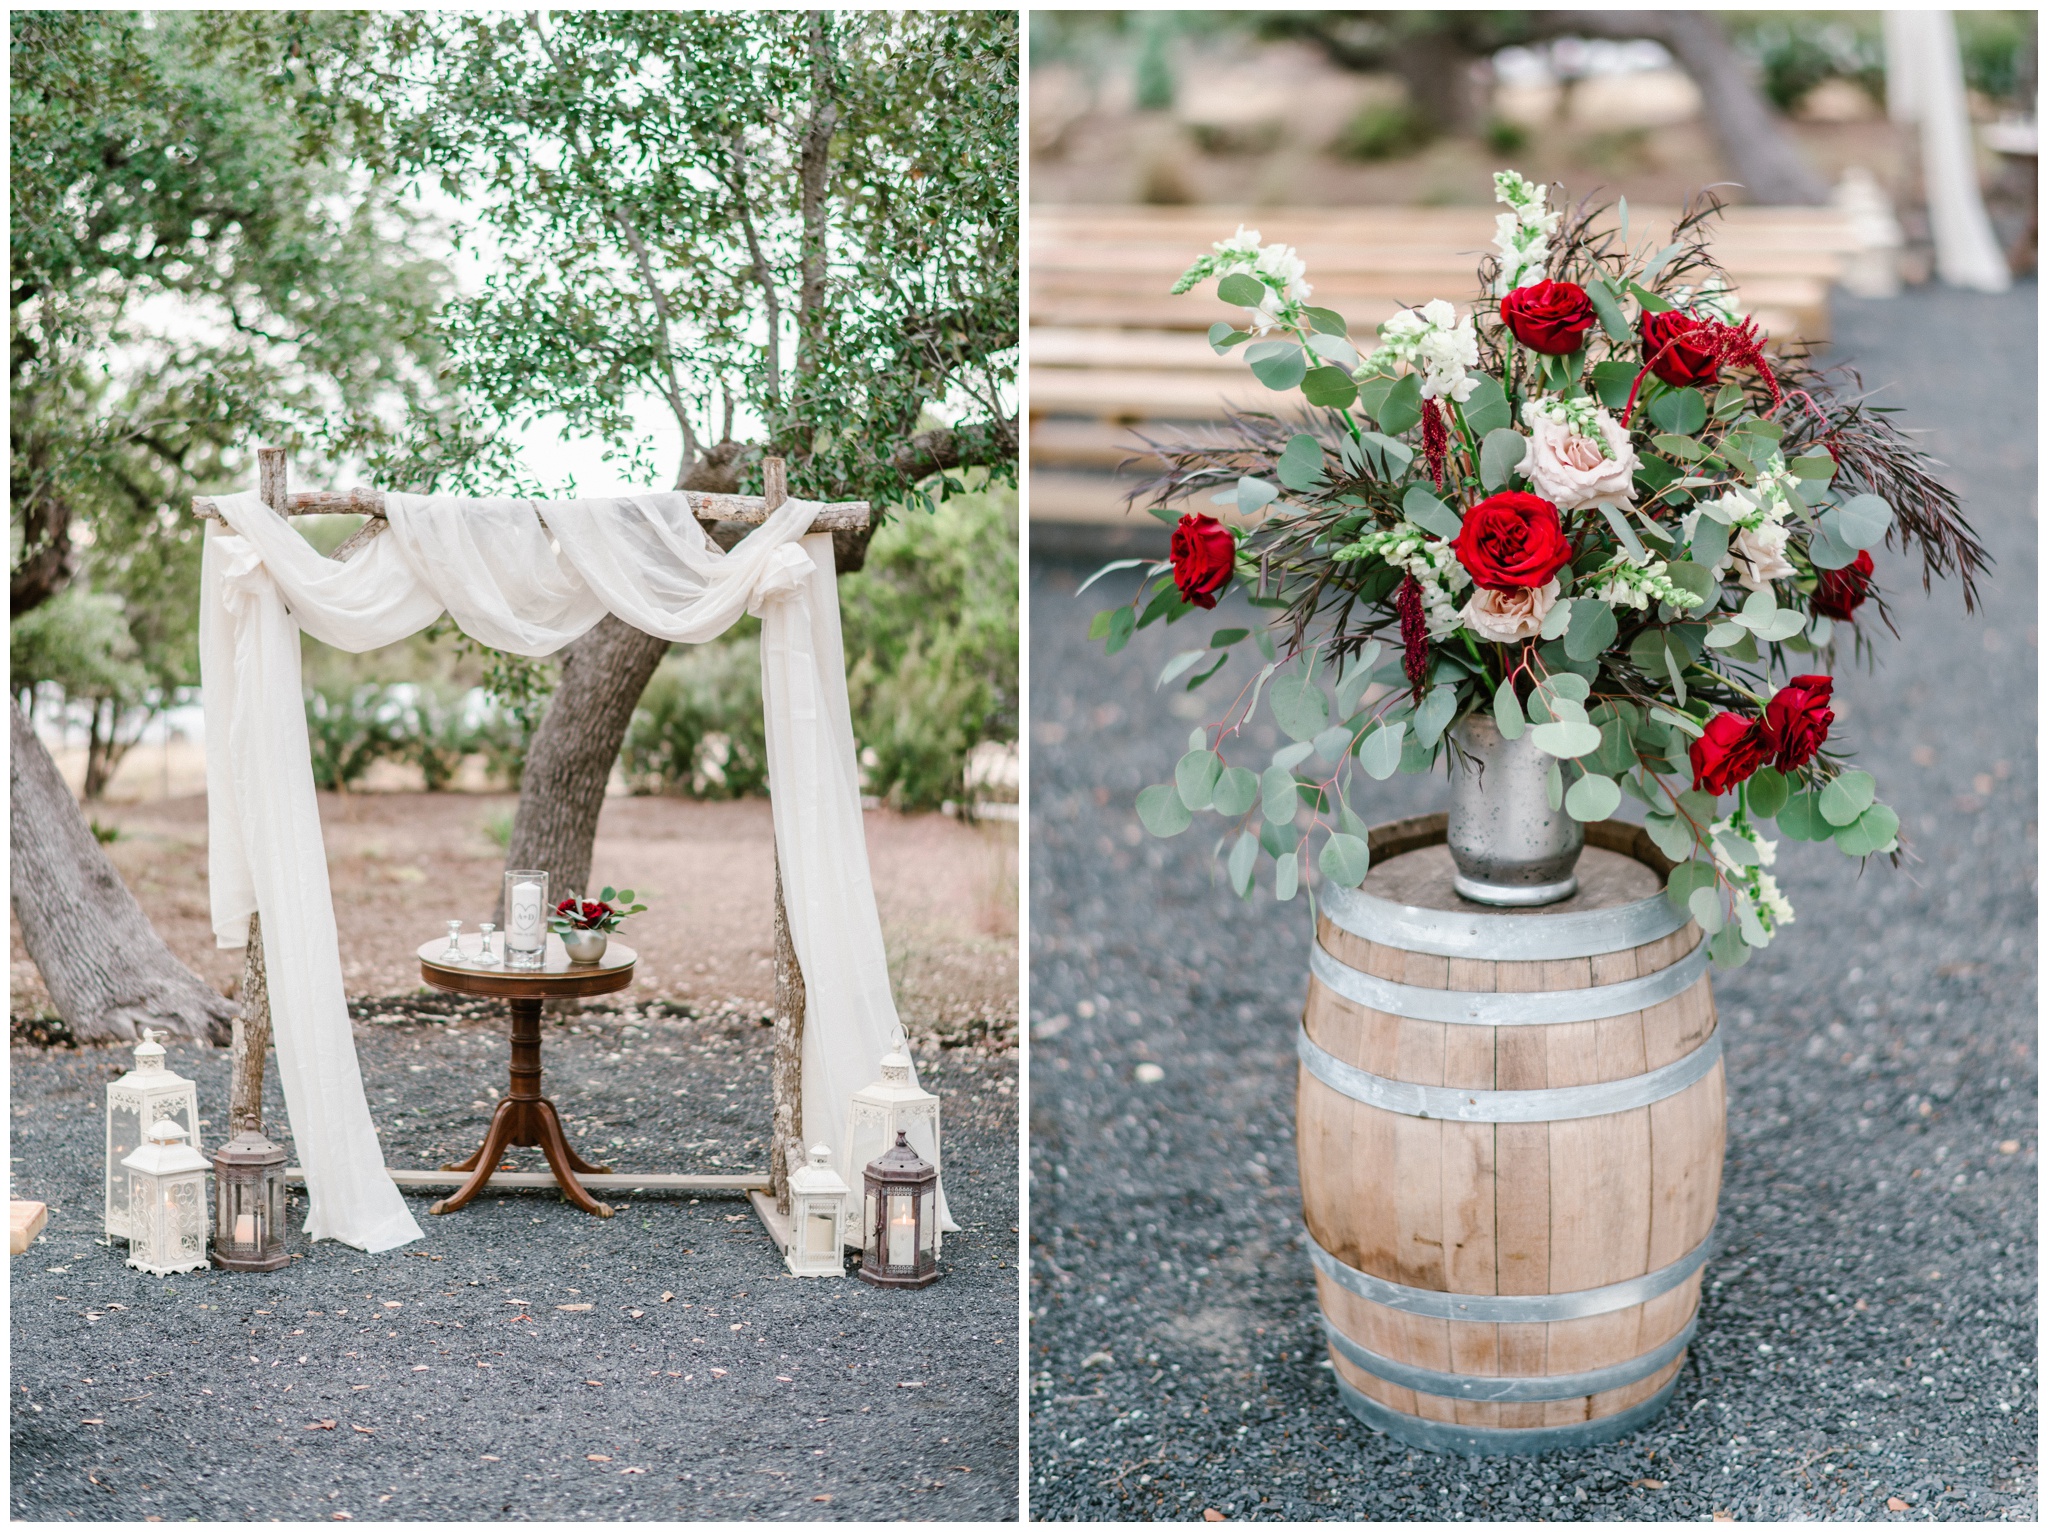 Ceremony arch with ivory draping, Burgundy and cream altar piece on wine barrel, Joslyn Holtfort Austin TX Wedding Photographer